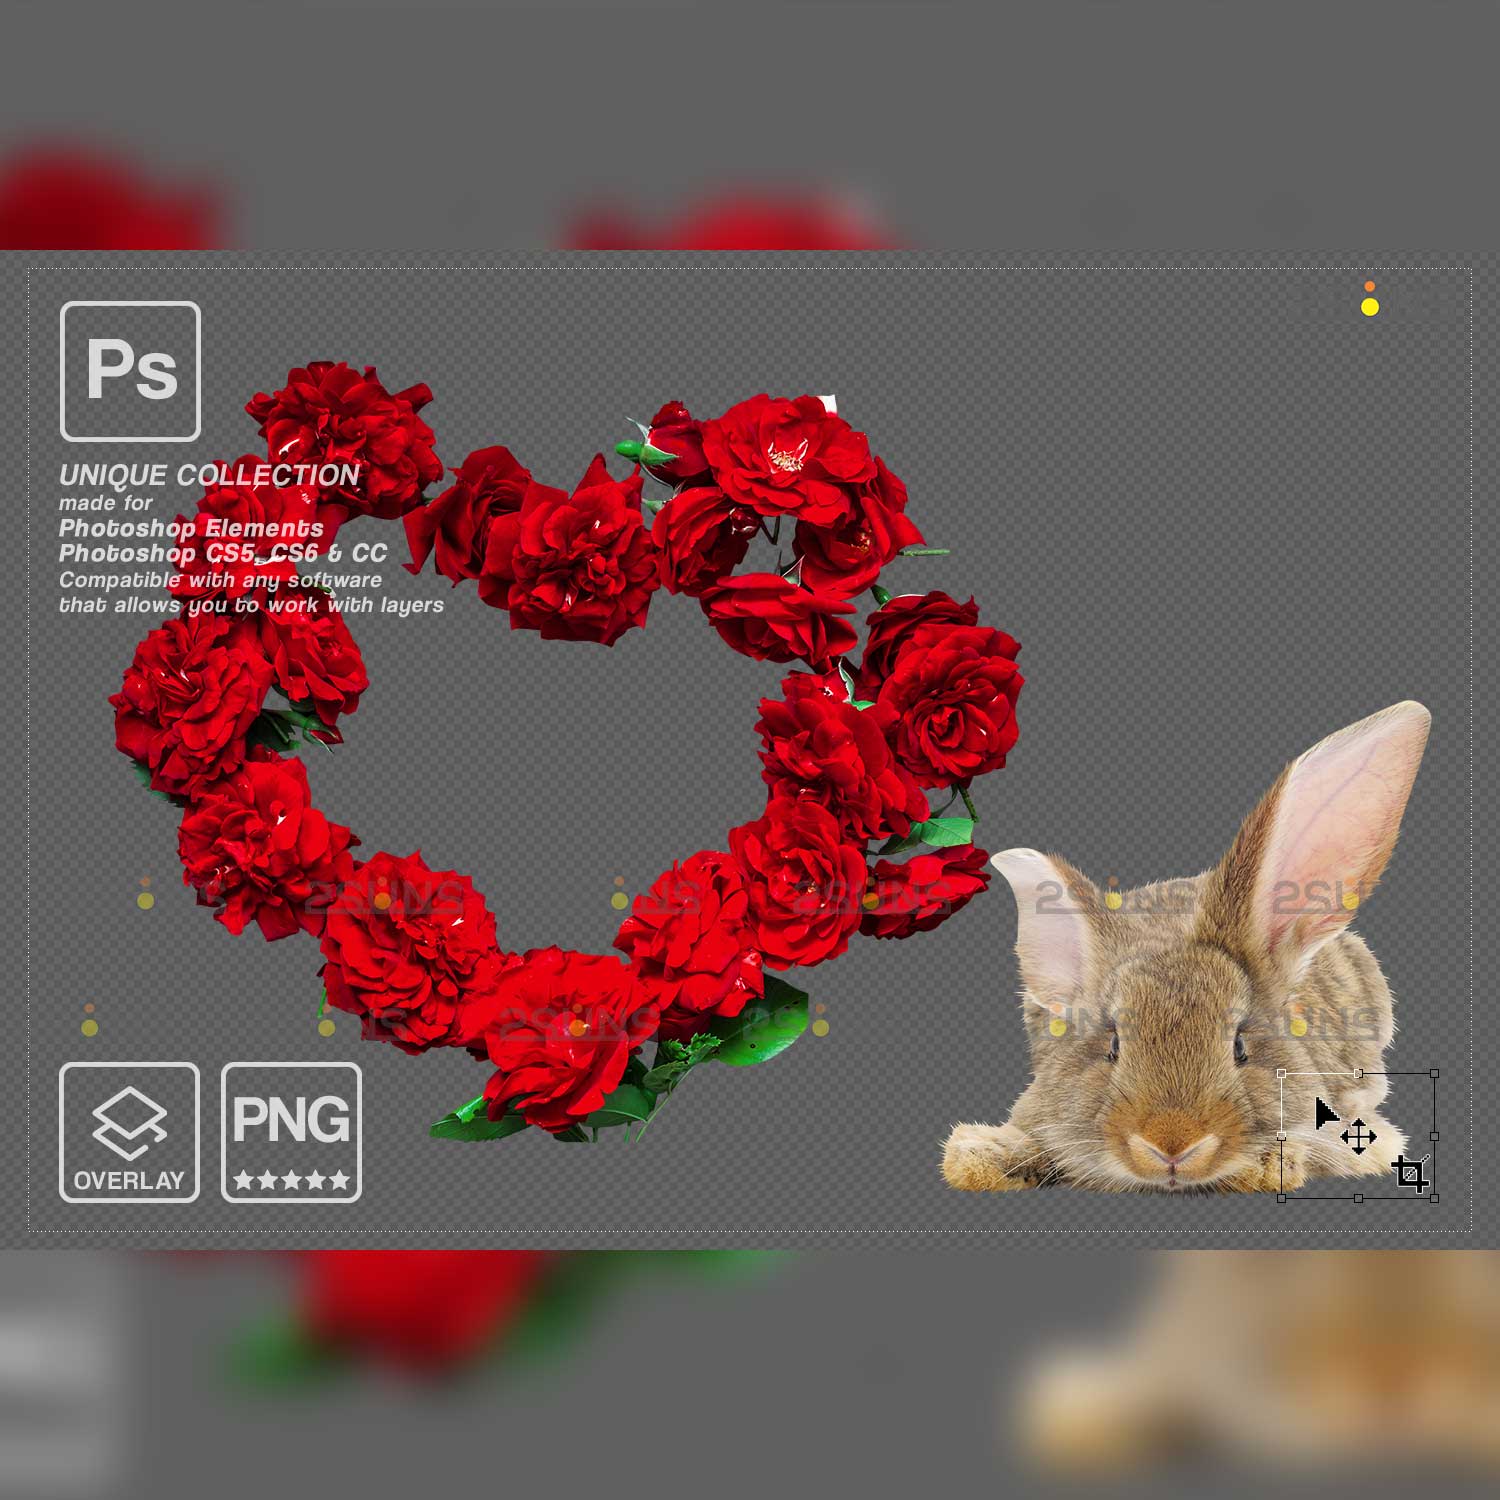 Easter Bunny Modern Photoshop Overlay Heart of Roses.